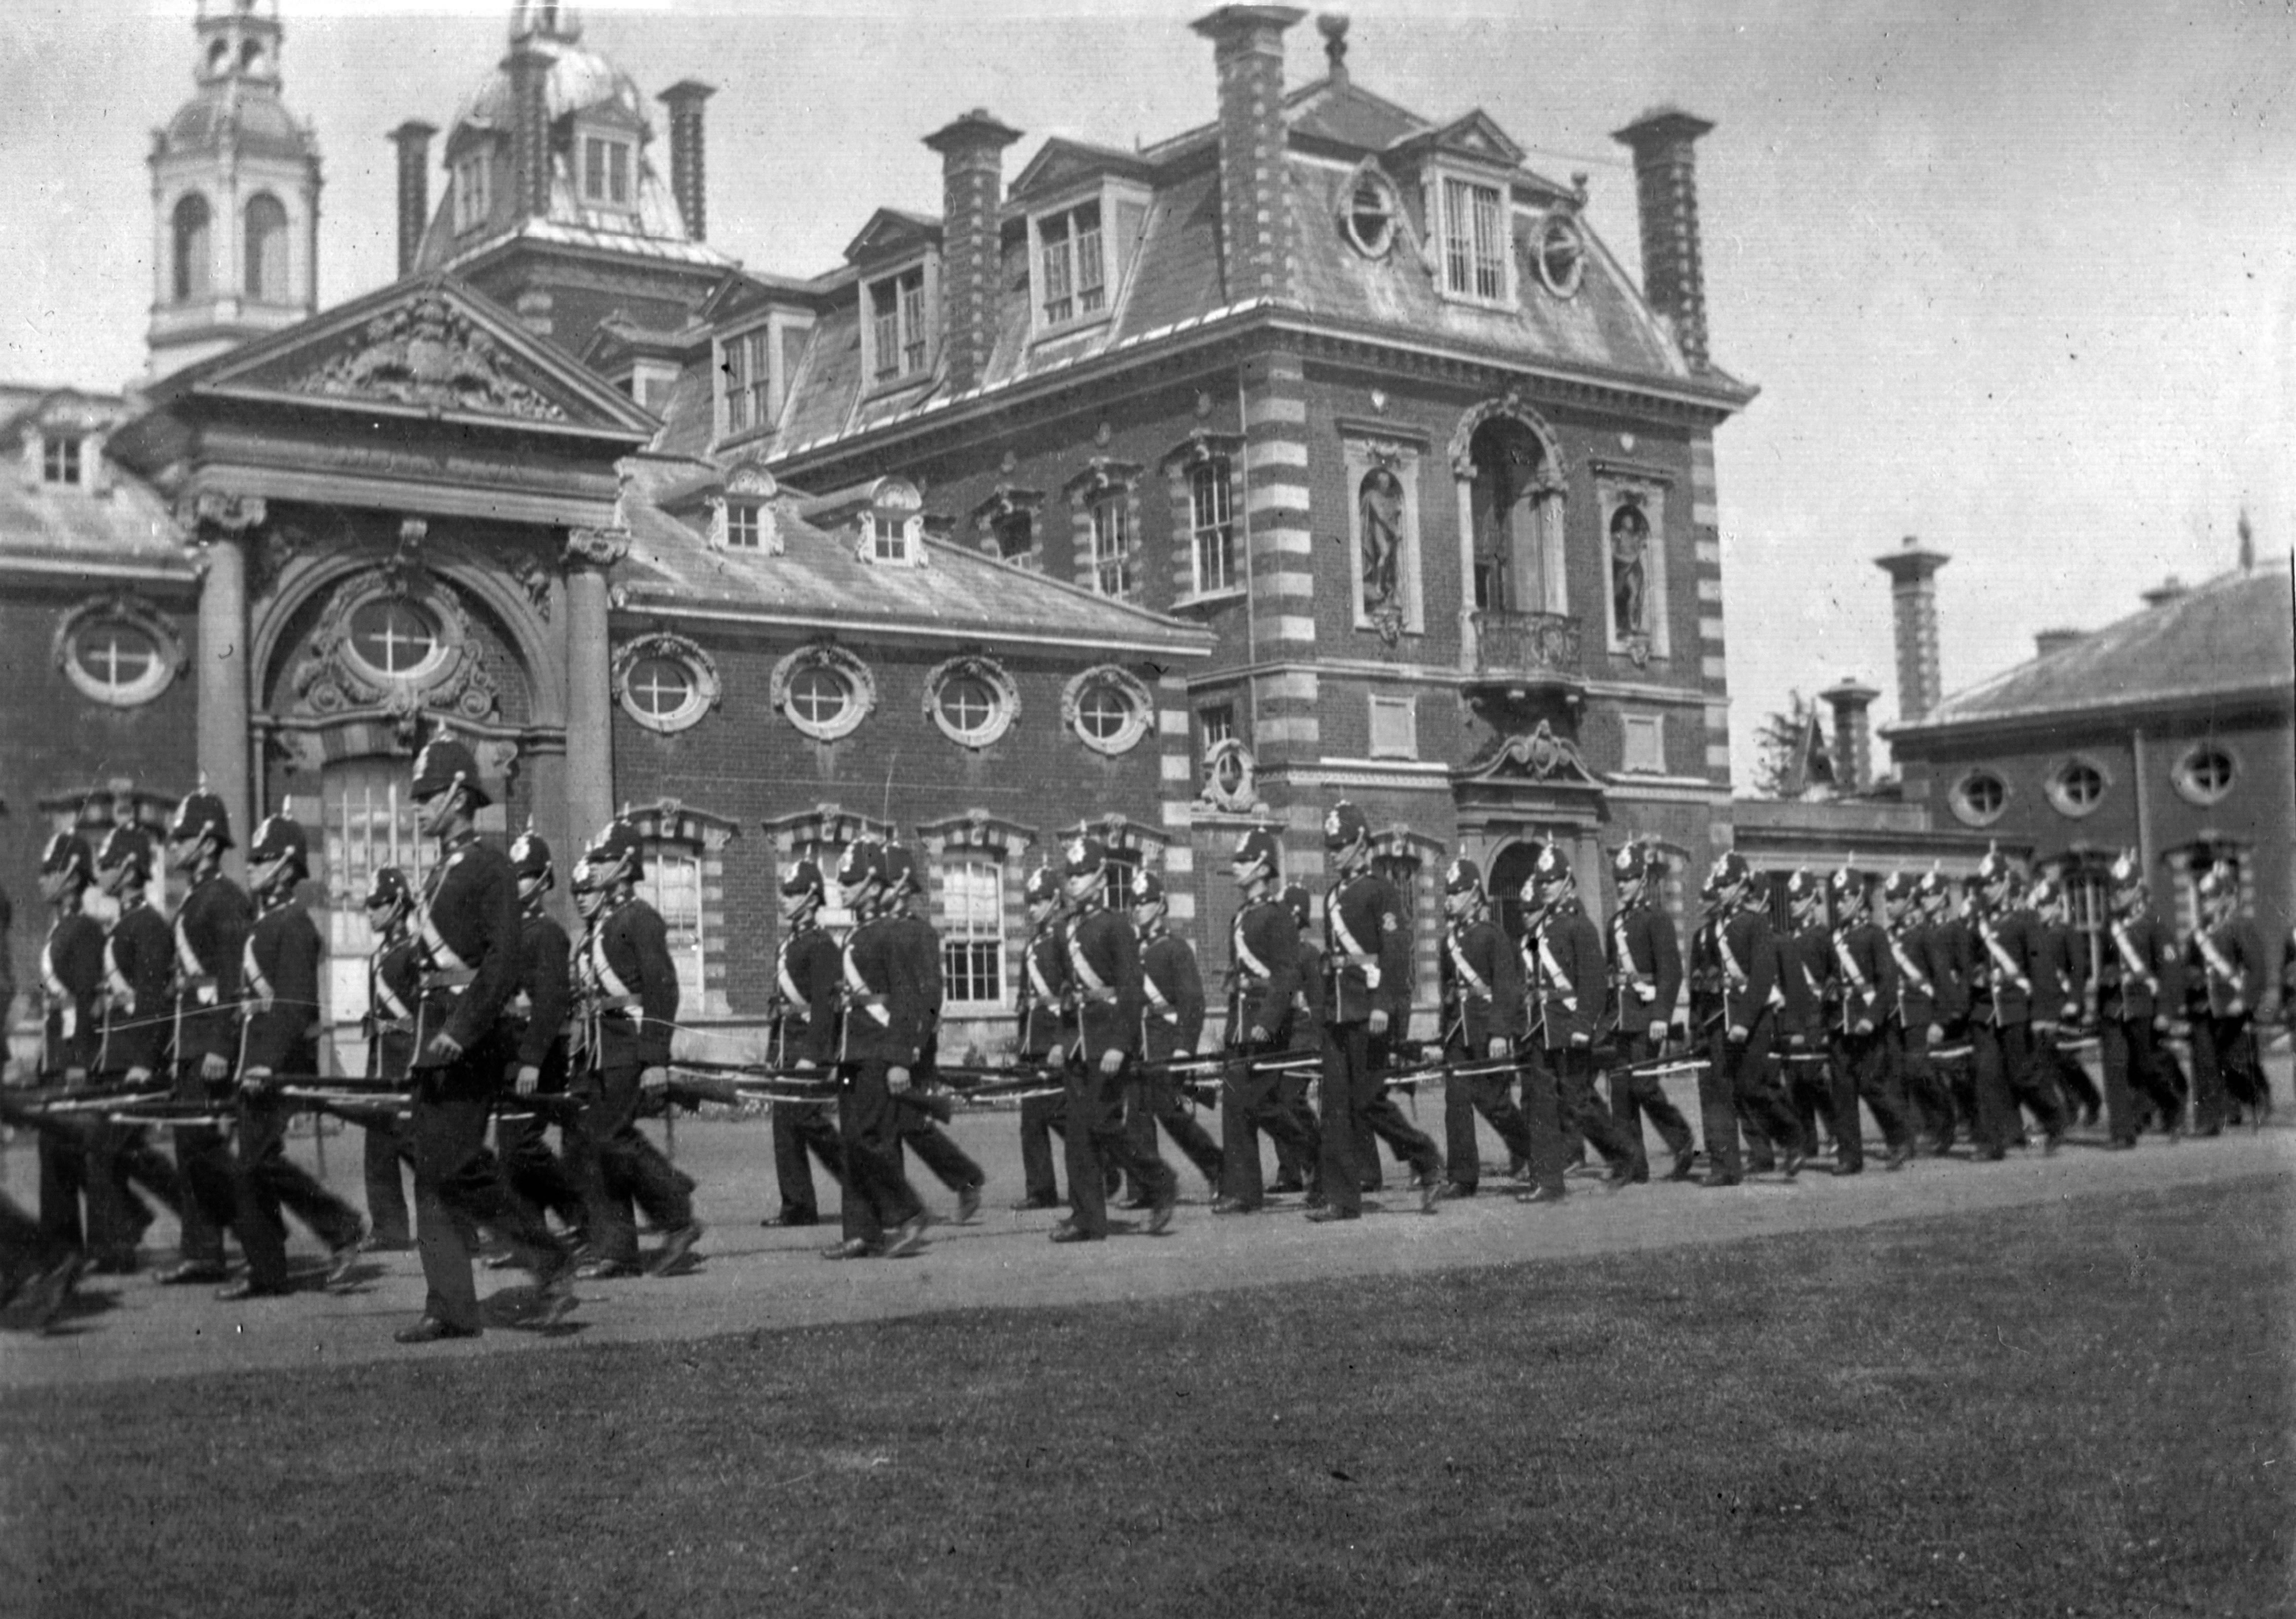 Wellington College from TheGenealogist's Image Archive